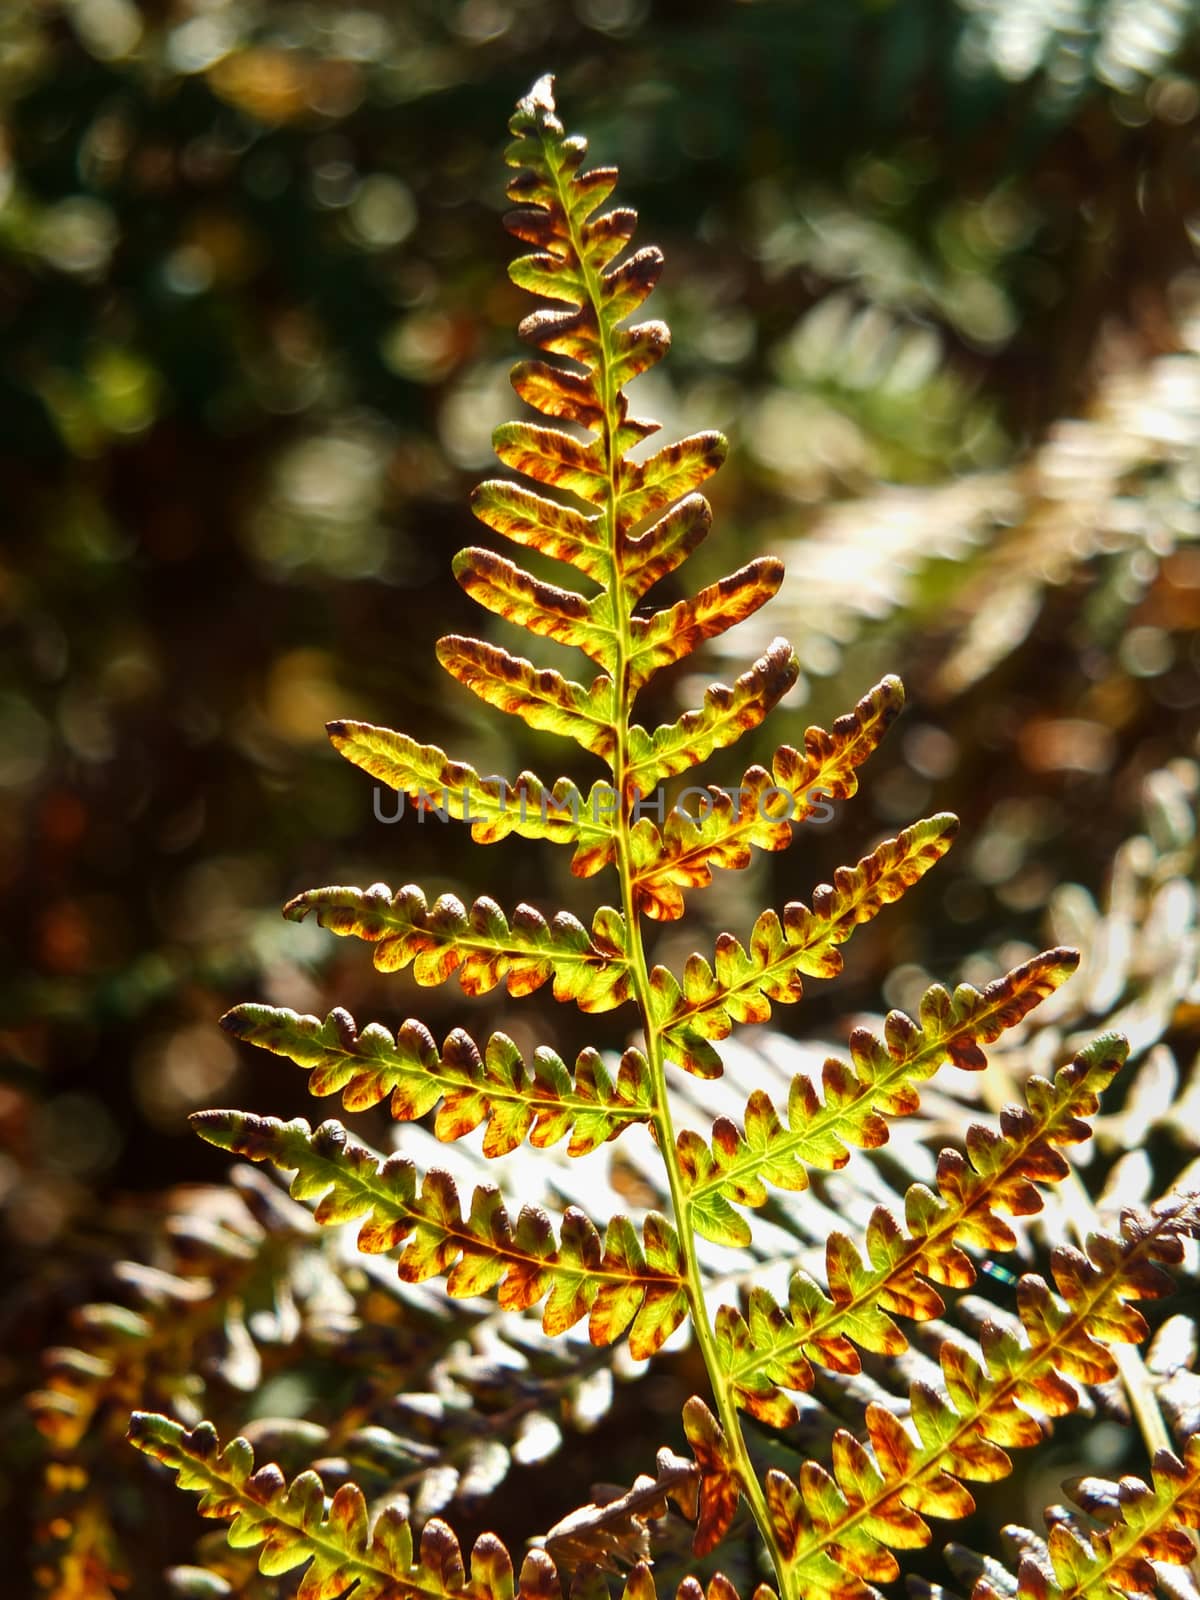 a close up of an illuminated woodland fern turning brown with a sunlit forest blurred background by philopenshaw